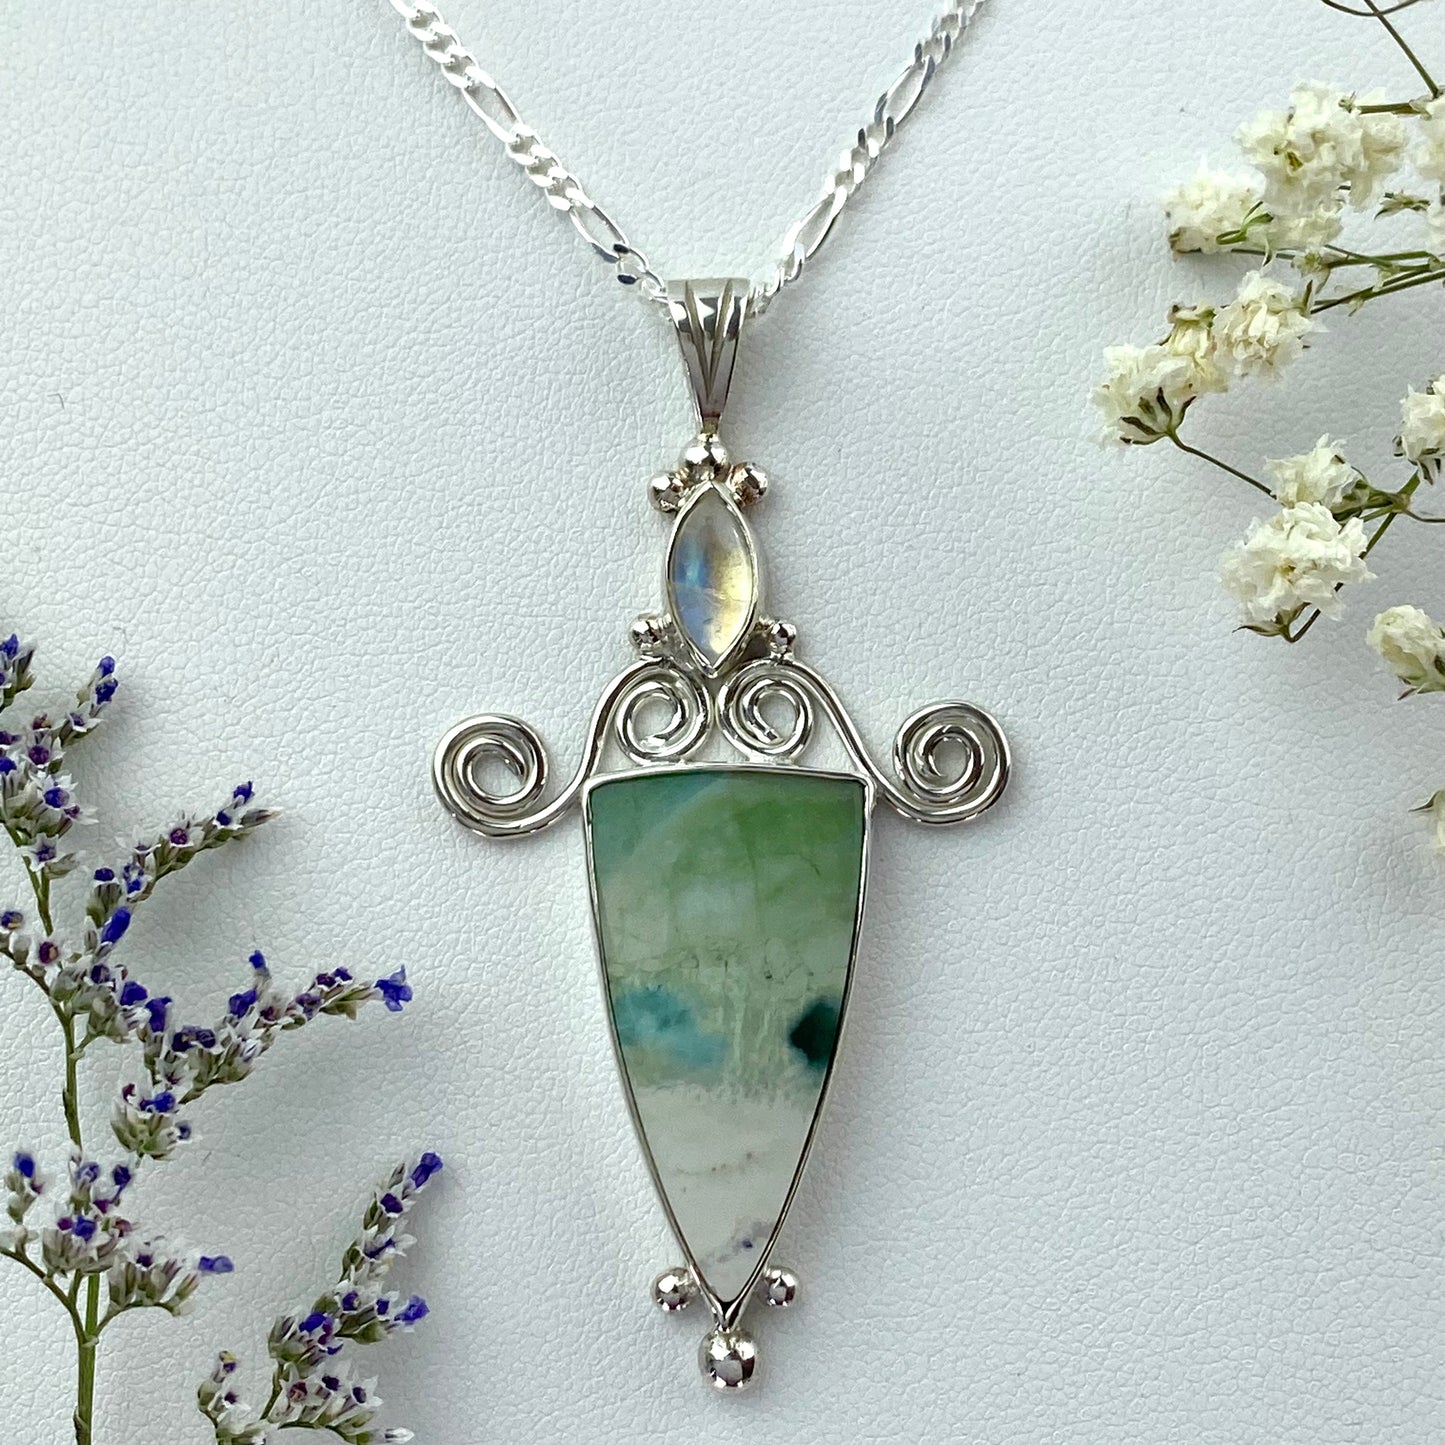 One of a Kind Bespoke Enchanted Opalized Wood & Moonstone Necklace